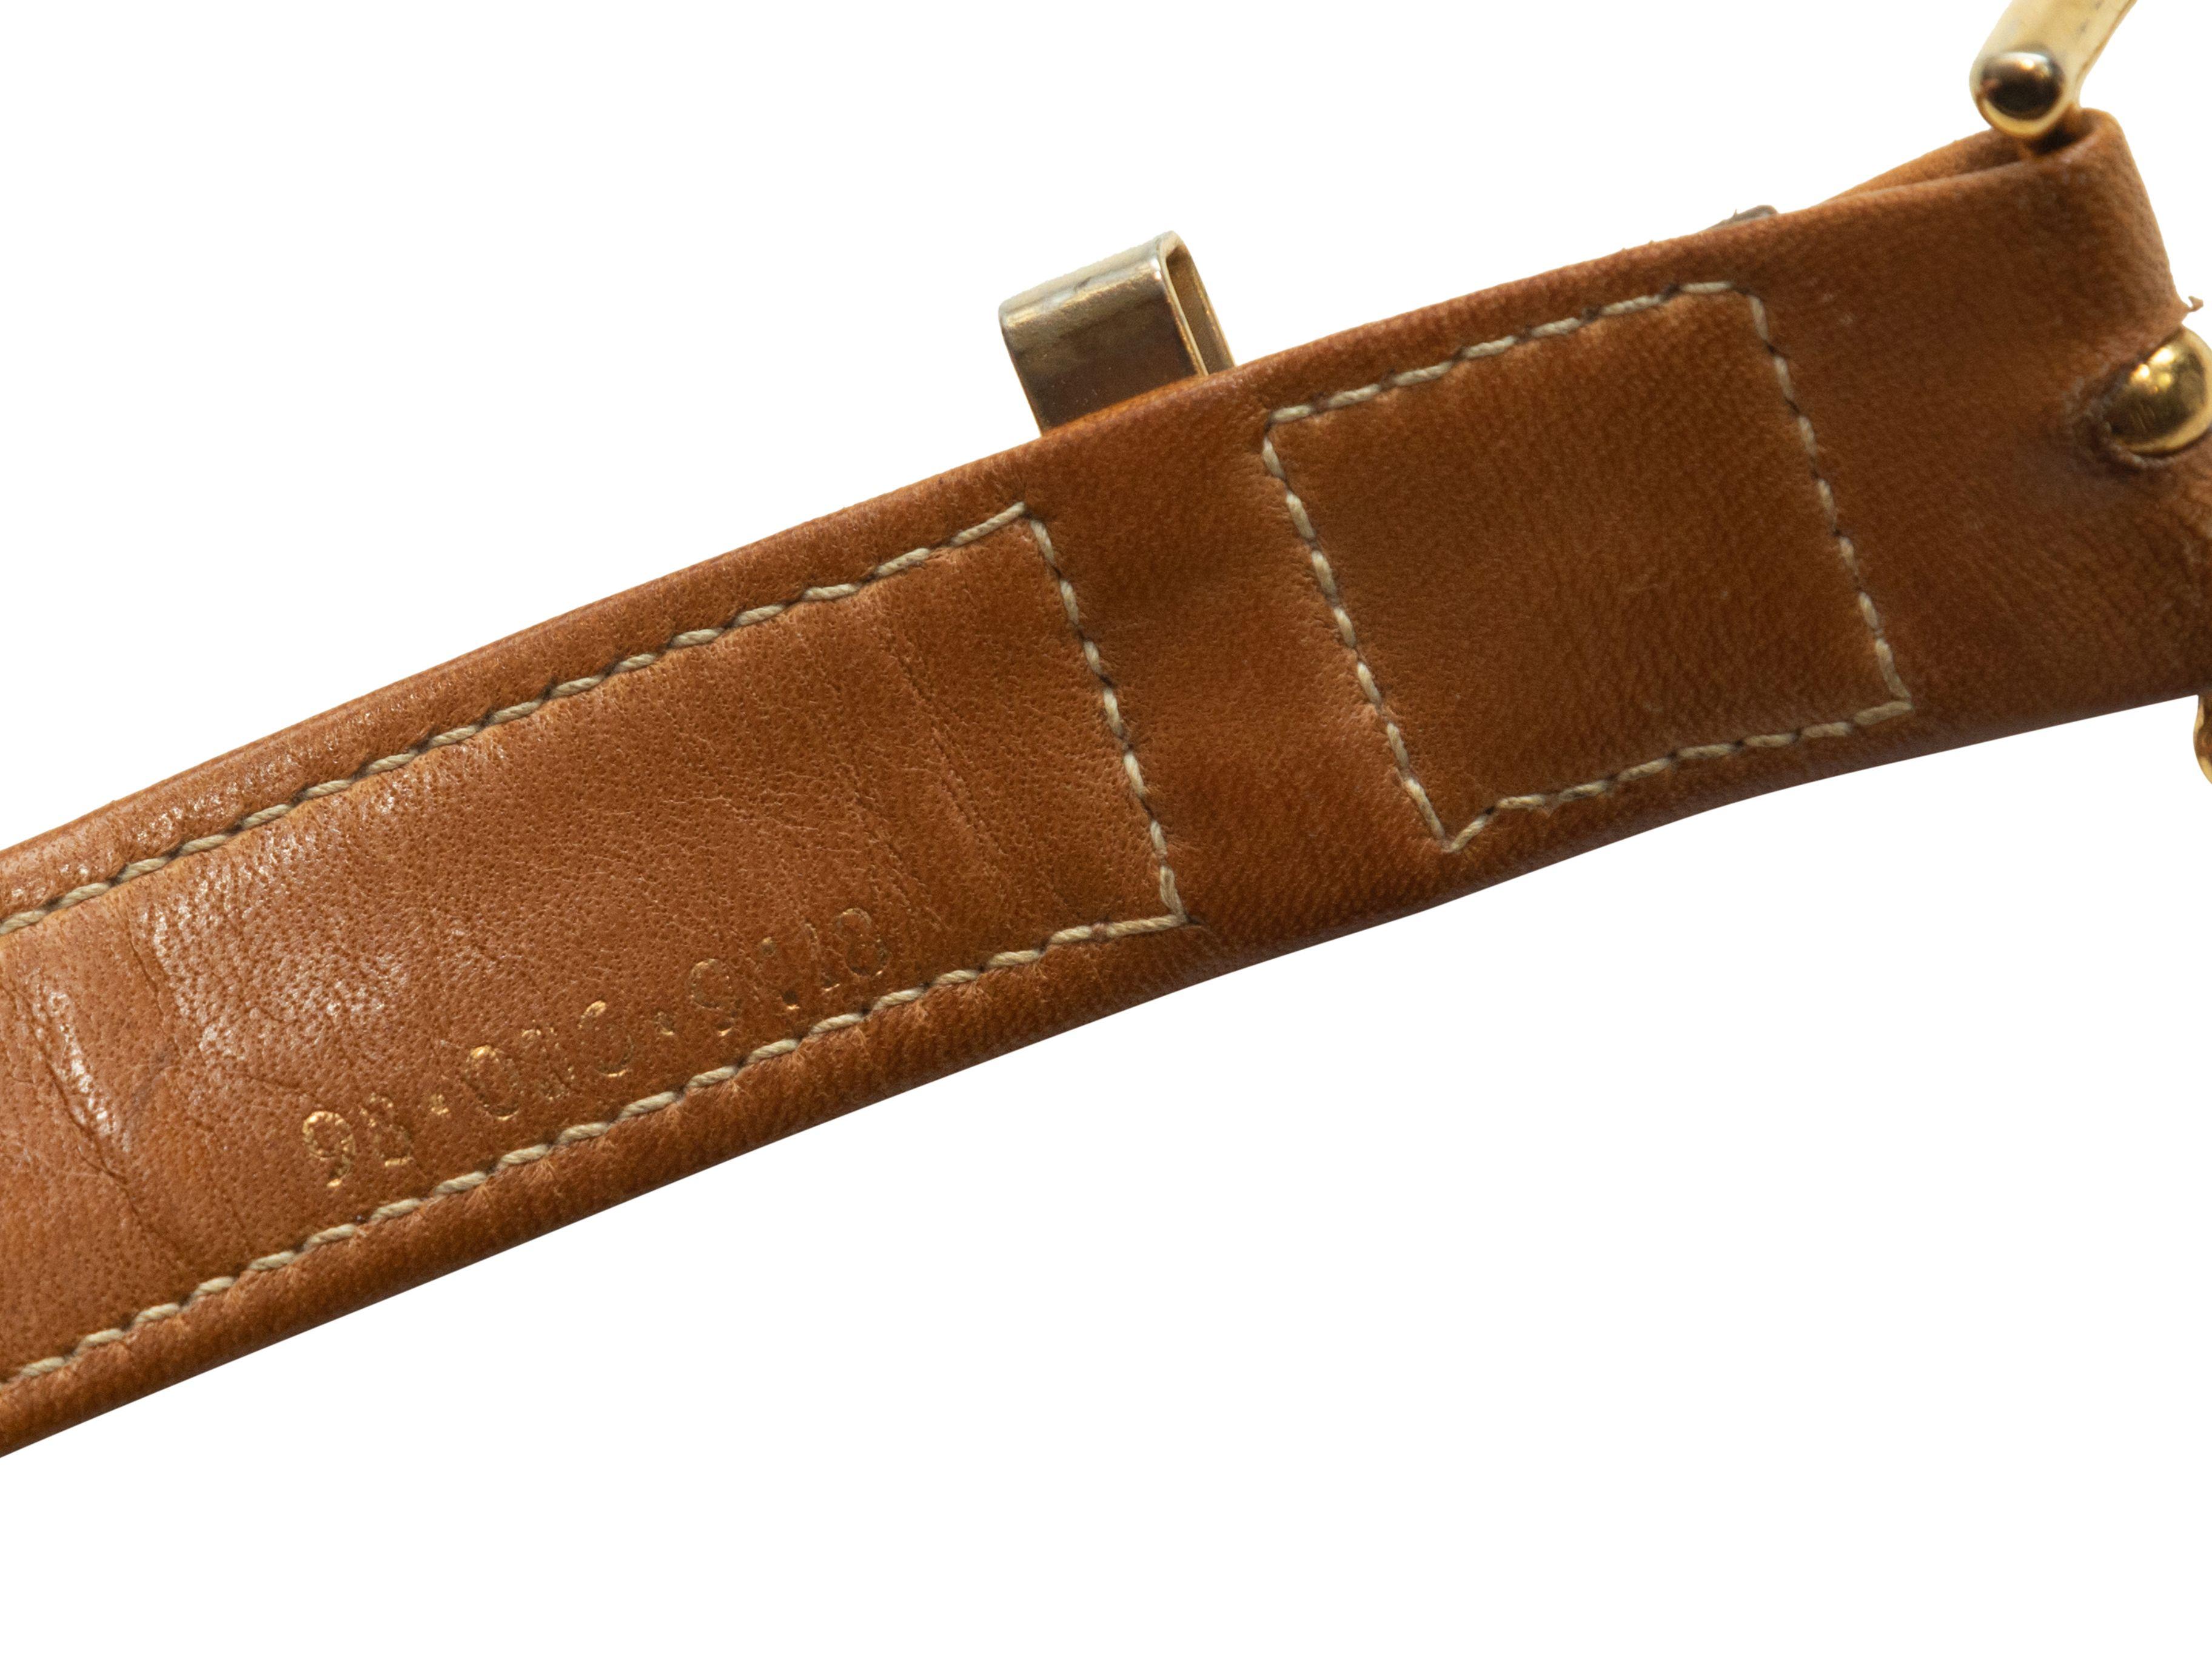 Product Details: Vintage taupe leather belt by Gucci. Green and red web stitching detail. Gold-tone buckle closure. 1